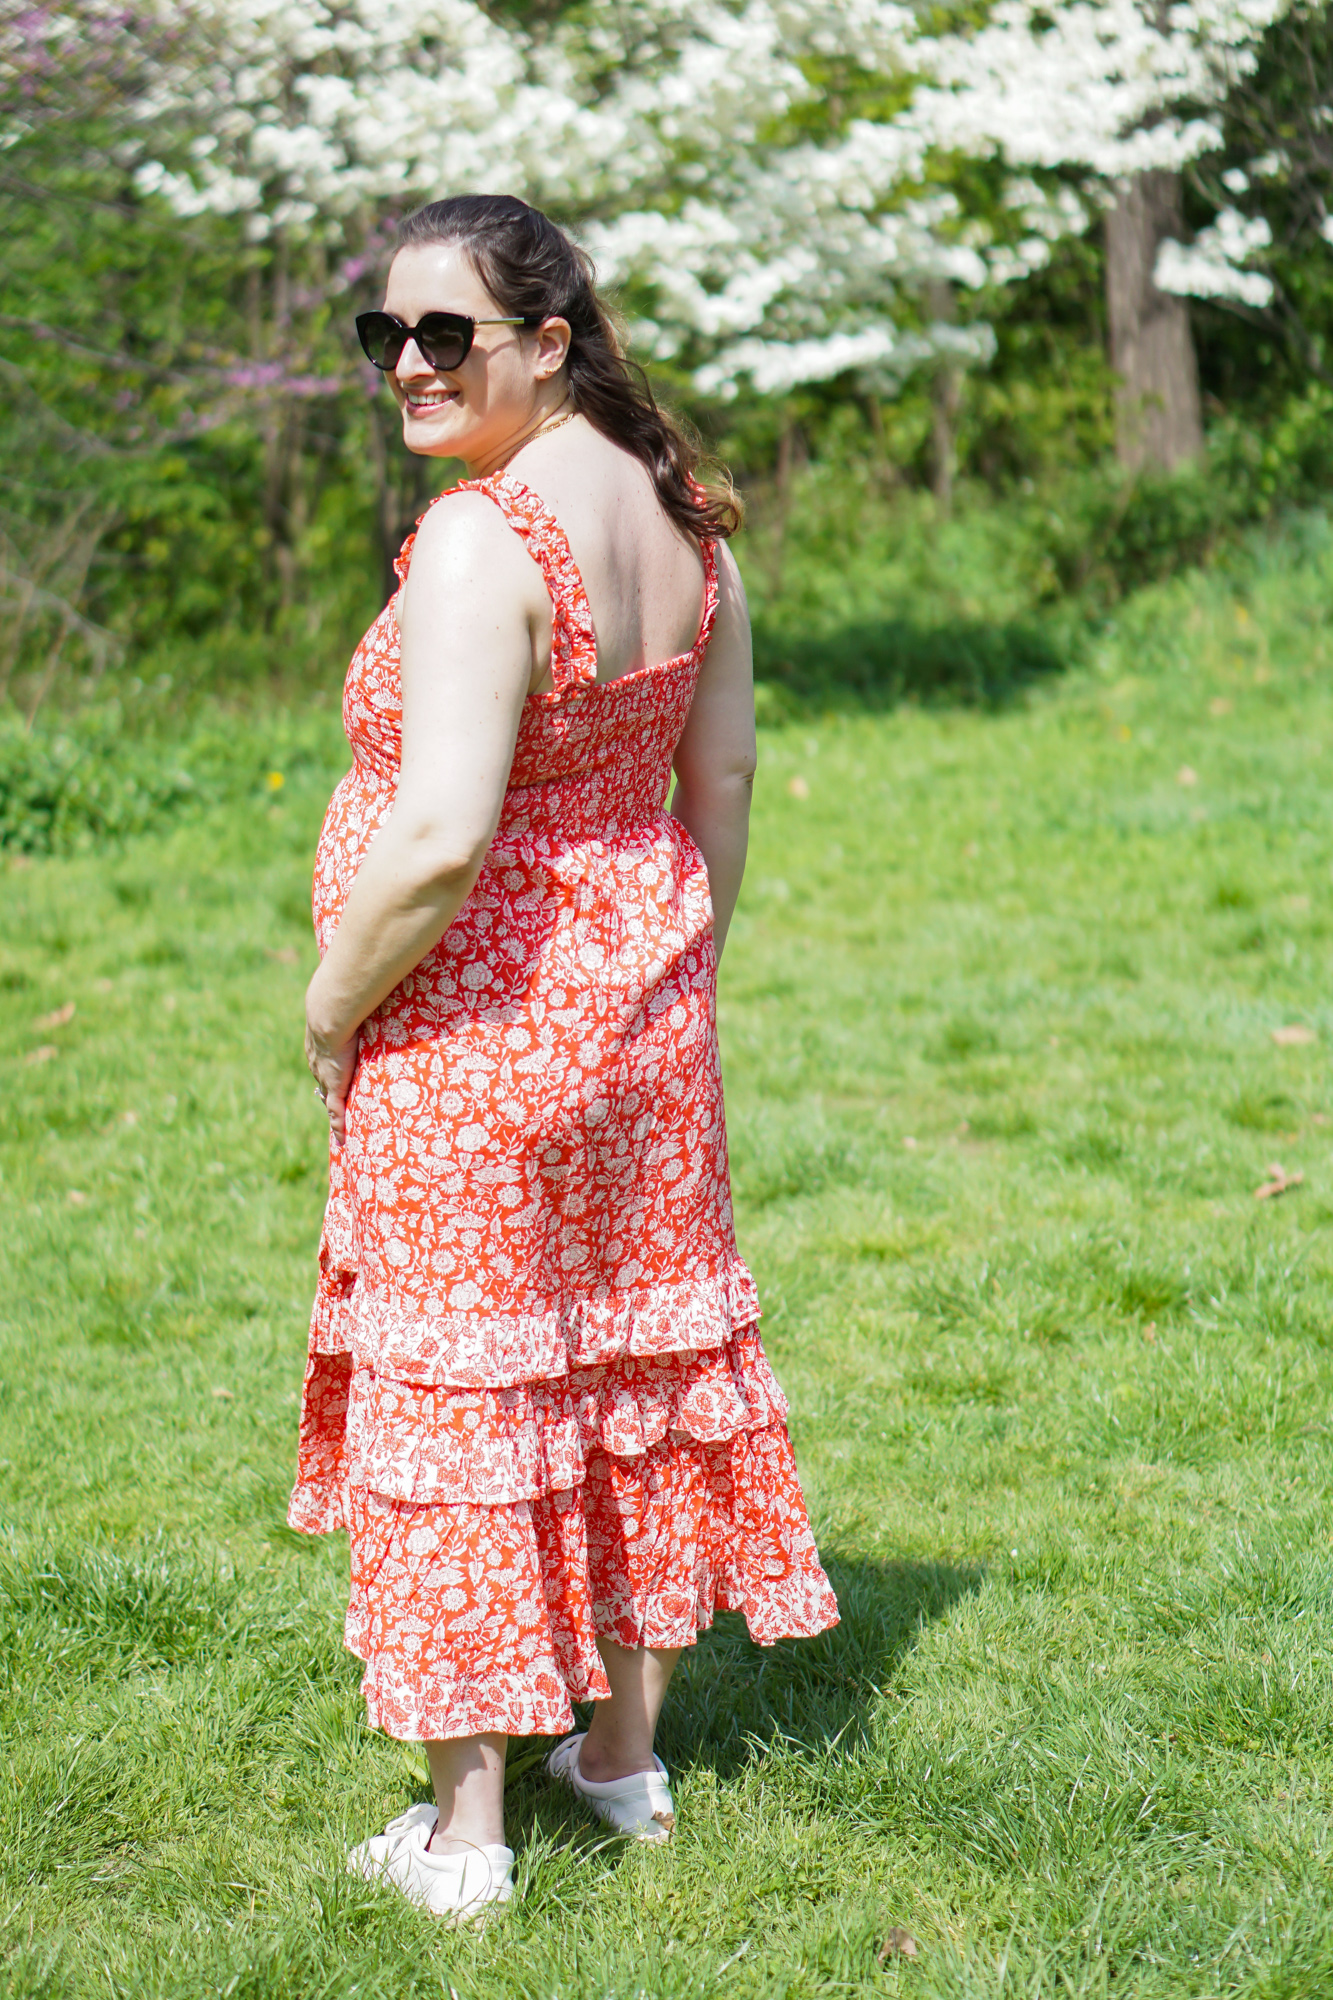 Red and white floral dress